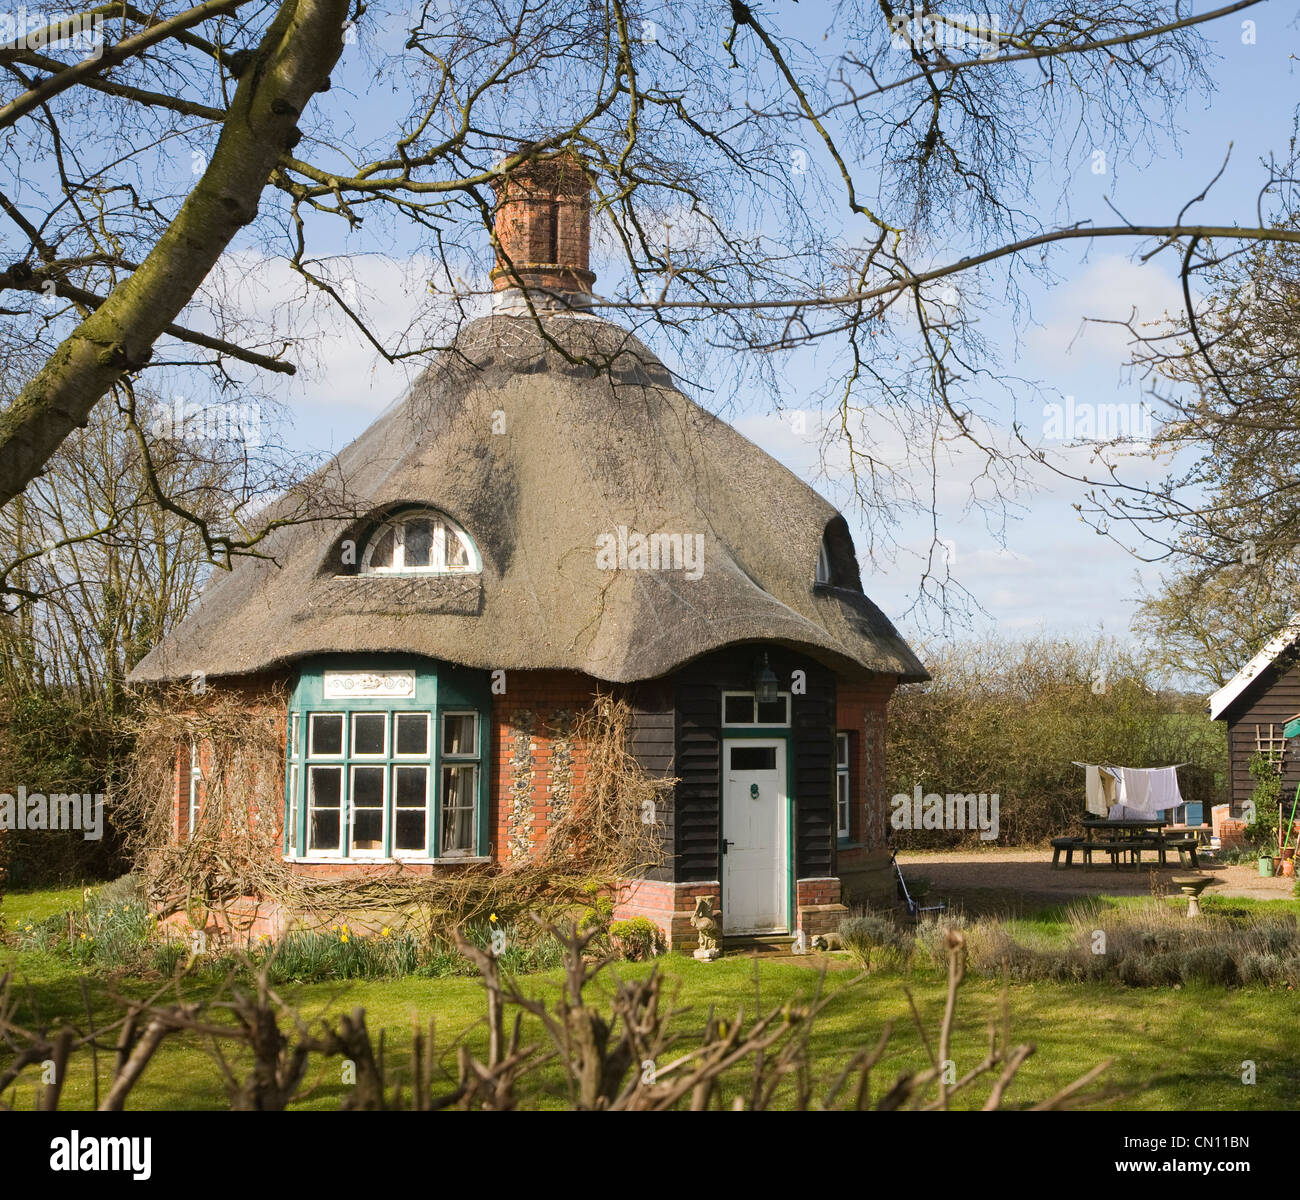 Thatched round house at Easton, Suffolk, England Stock Photo